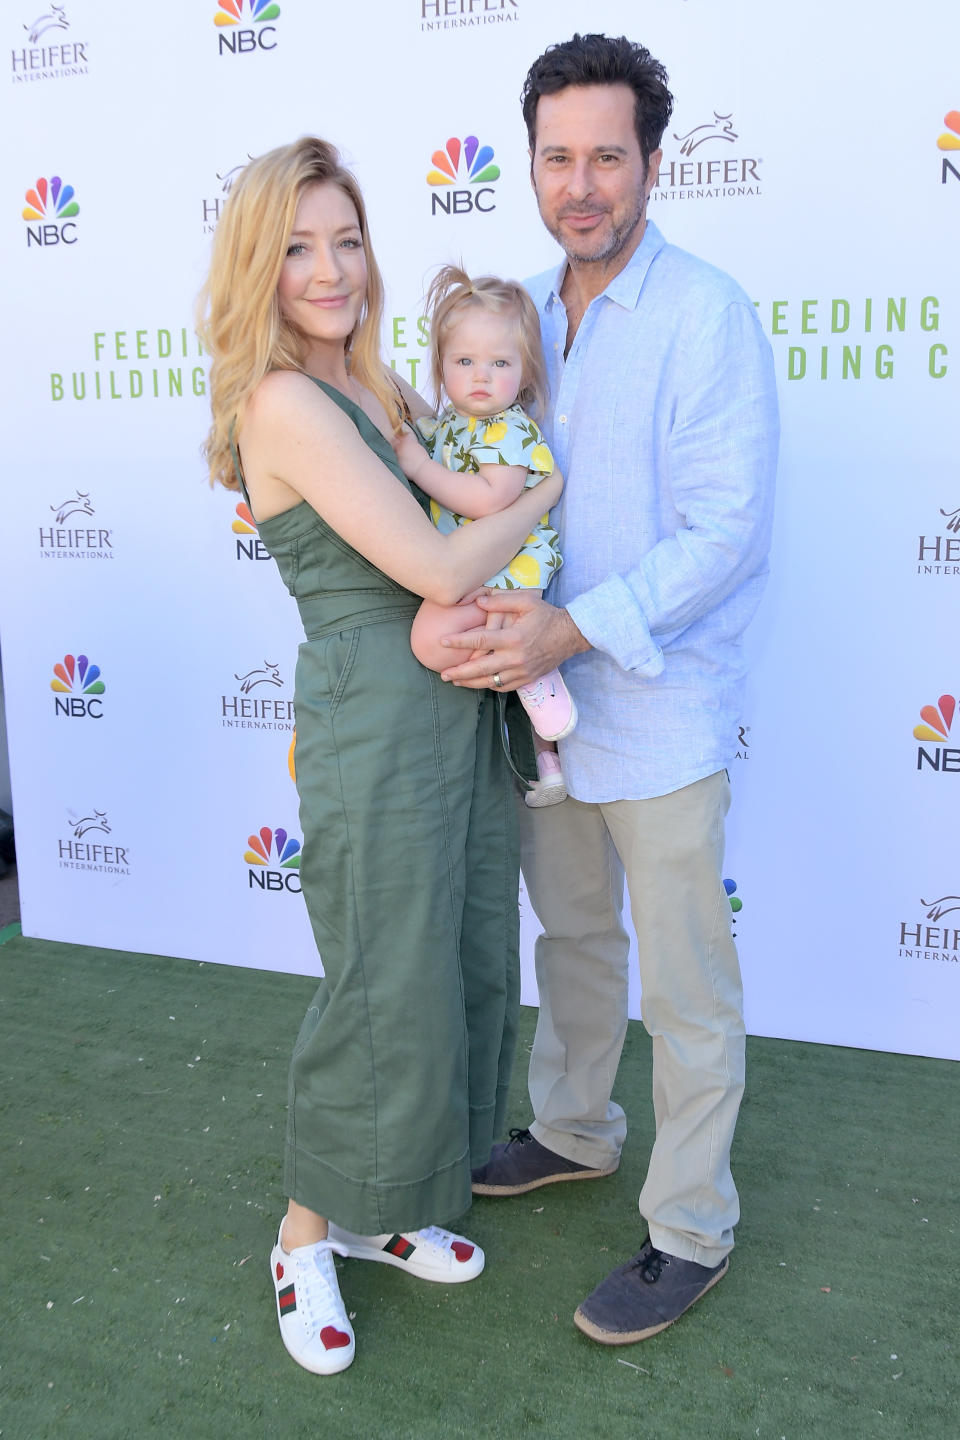 They are casually dressed and carry their baby at an NBC event